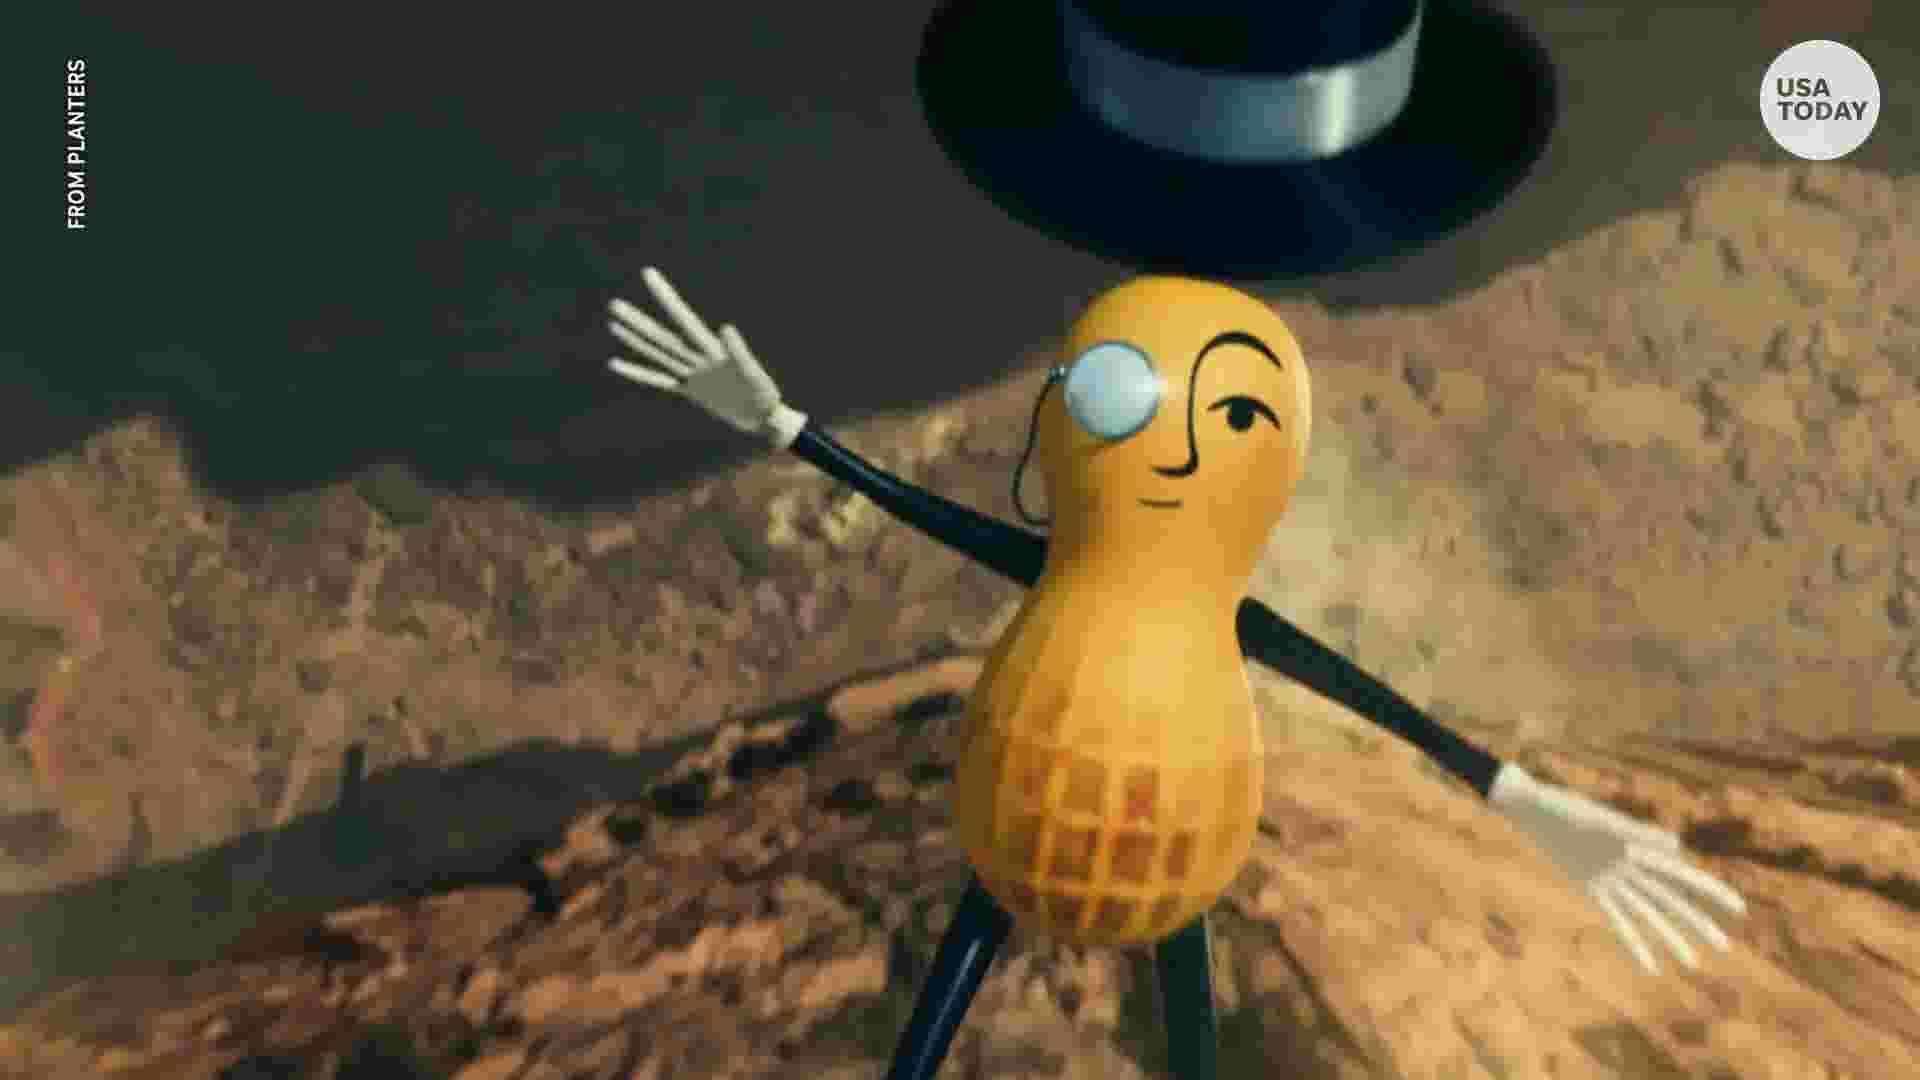 Mr. Peanut killed in Planters commercial for Super Bowl LIV campaign1920 x 1080